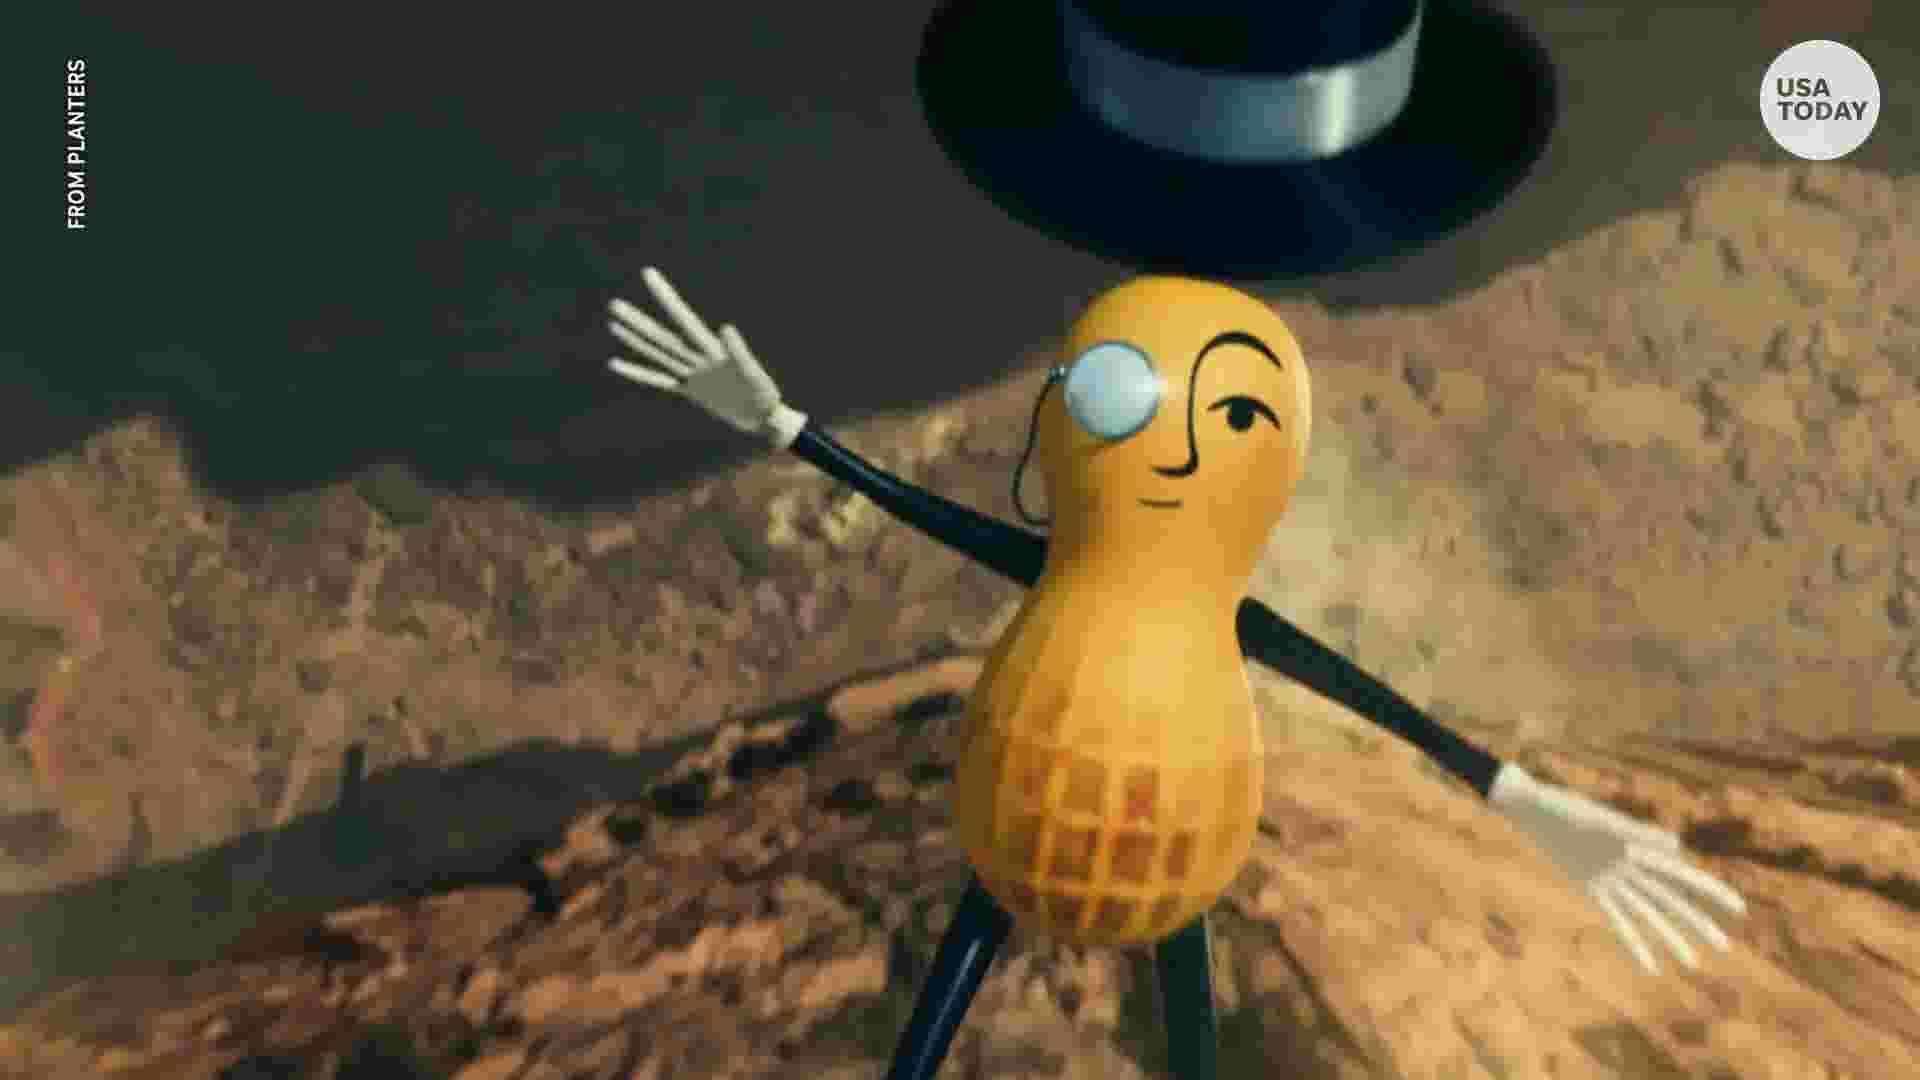 Mr. Peanut killed in Planters commercial for Super Bowl LIV campaign1920 x 1080